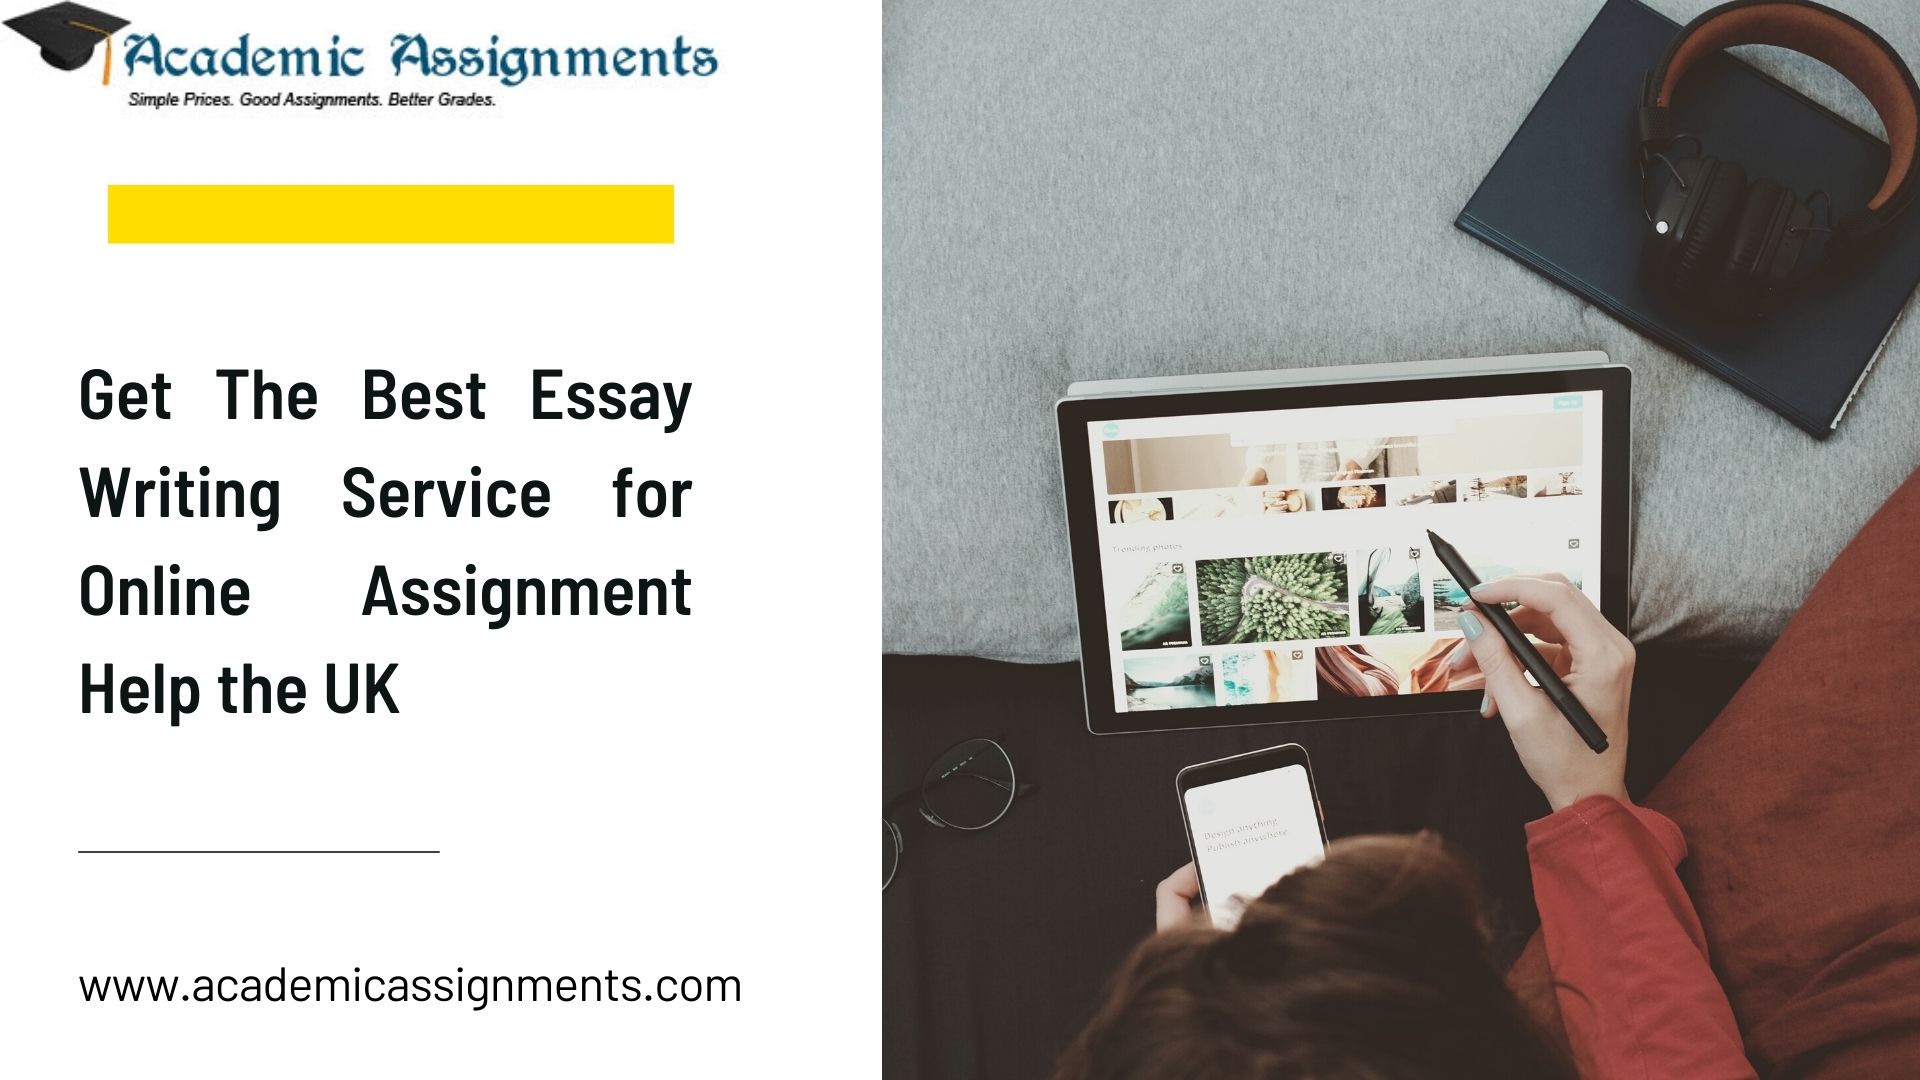 Get The Best Essay Writing Service for Online Assignment Help the UK